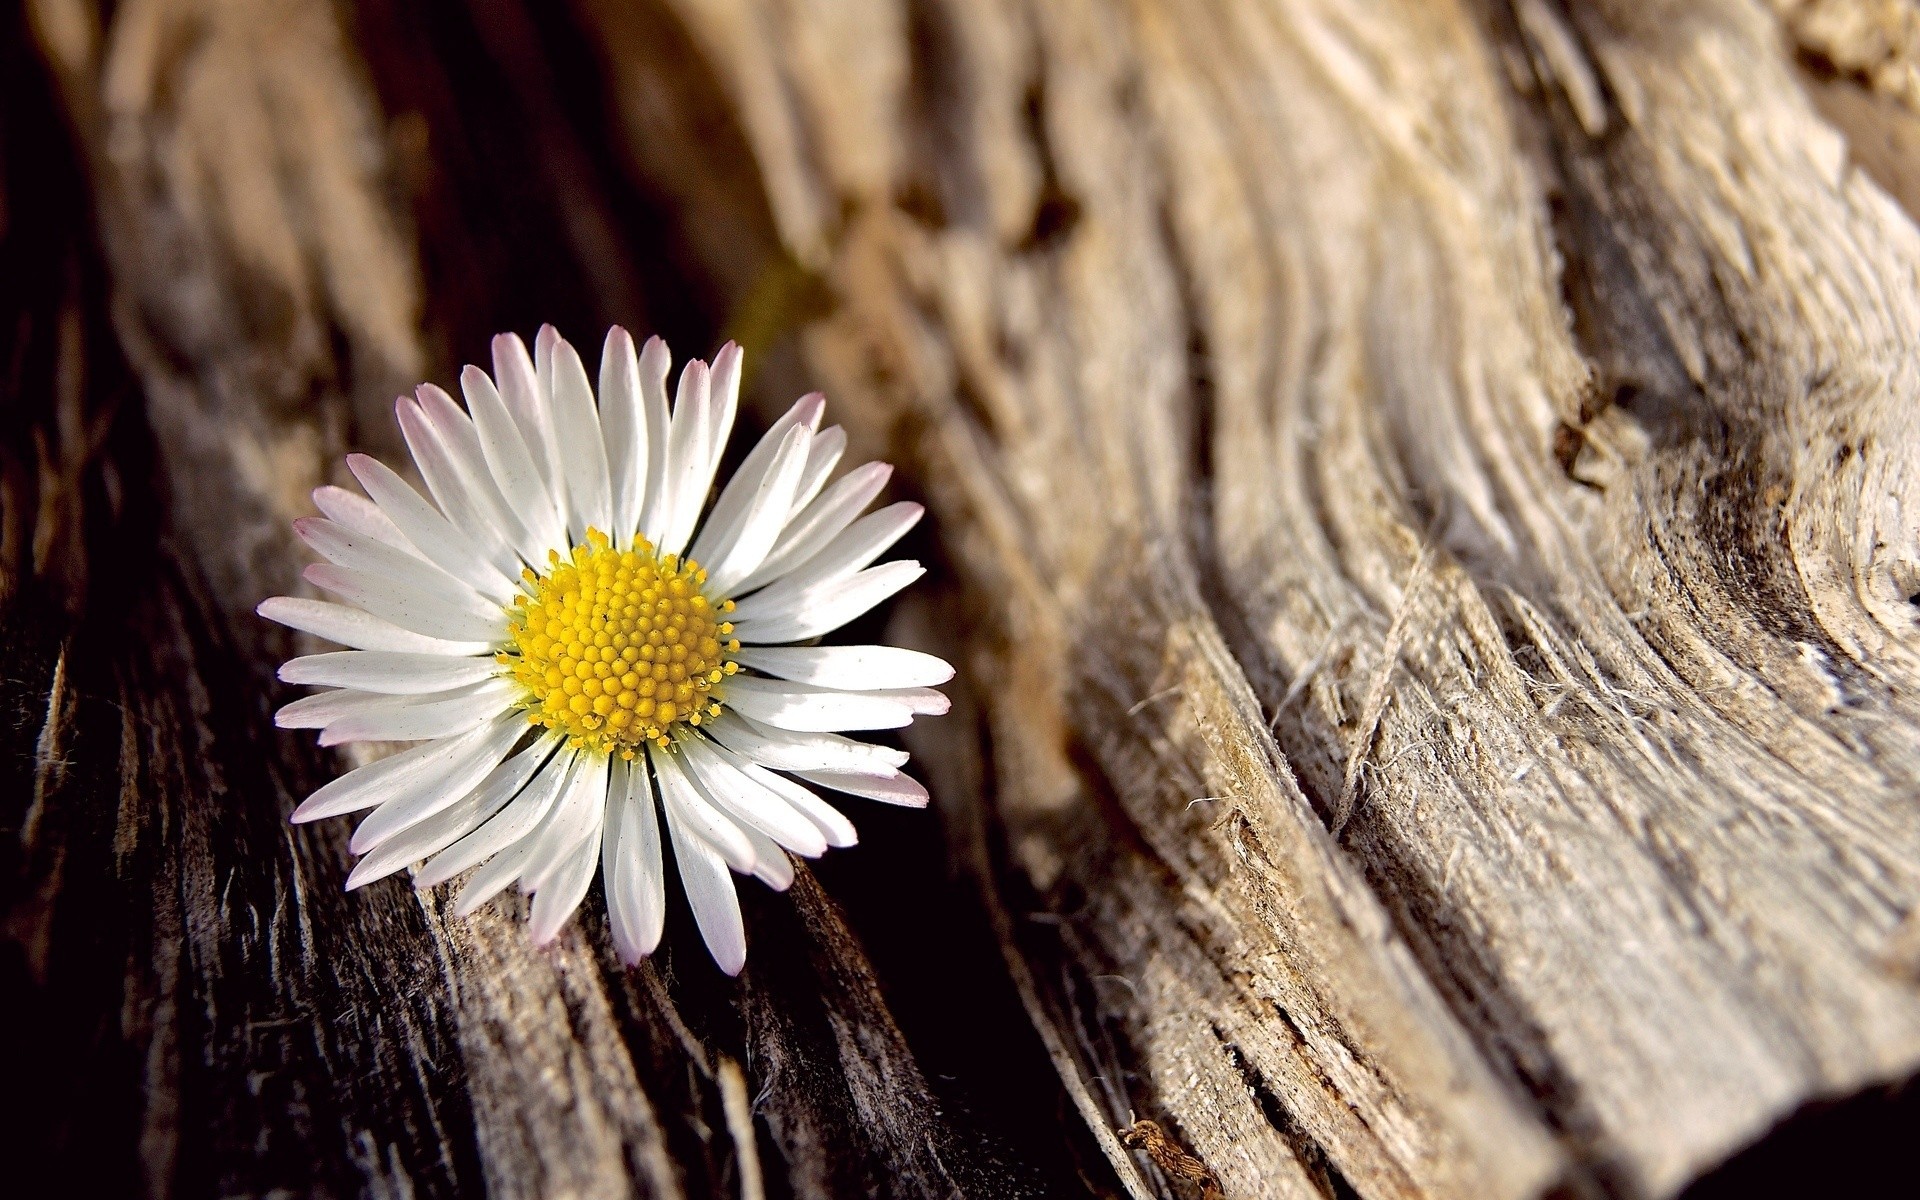 earth, daisy, bark, close up, white flower, flowers iphone wallpaper